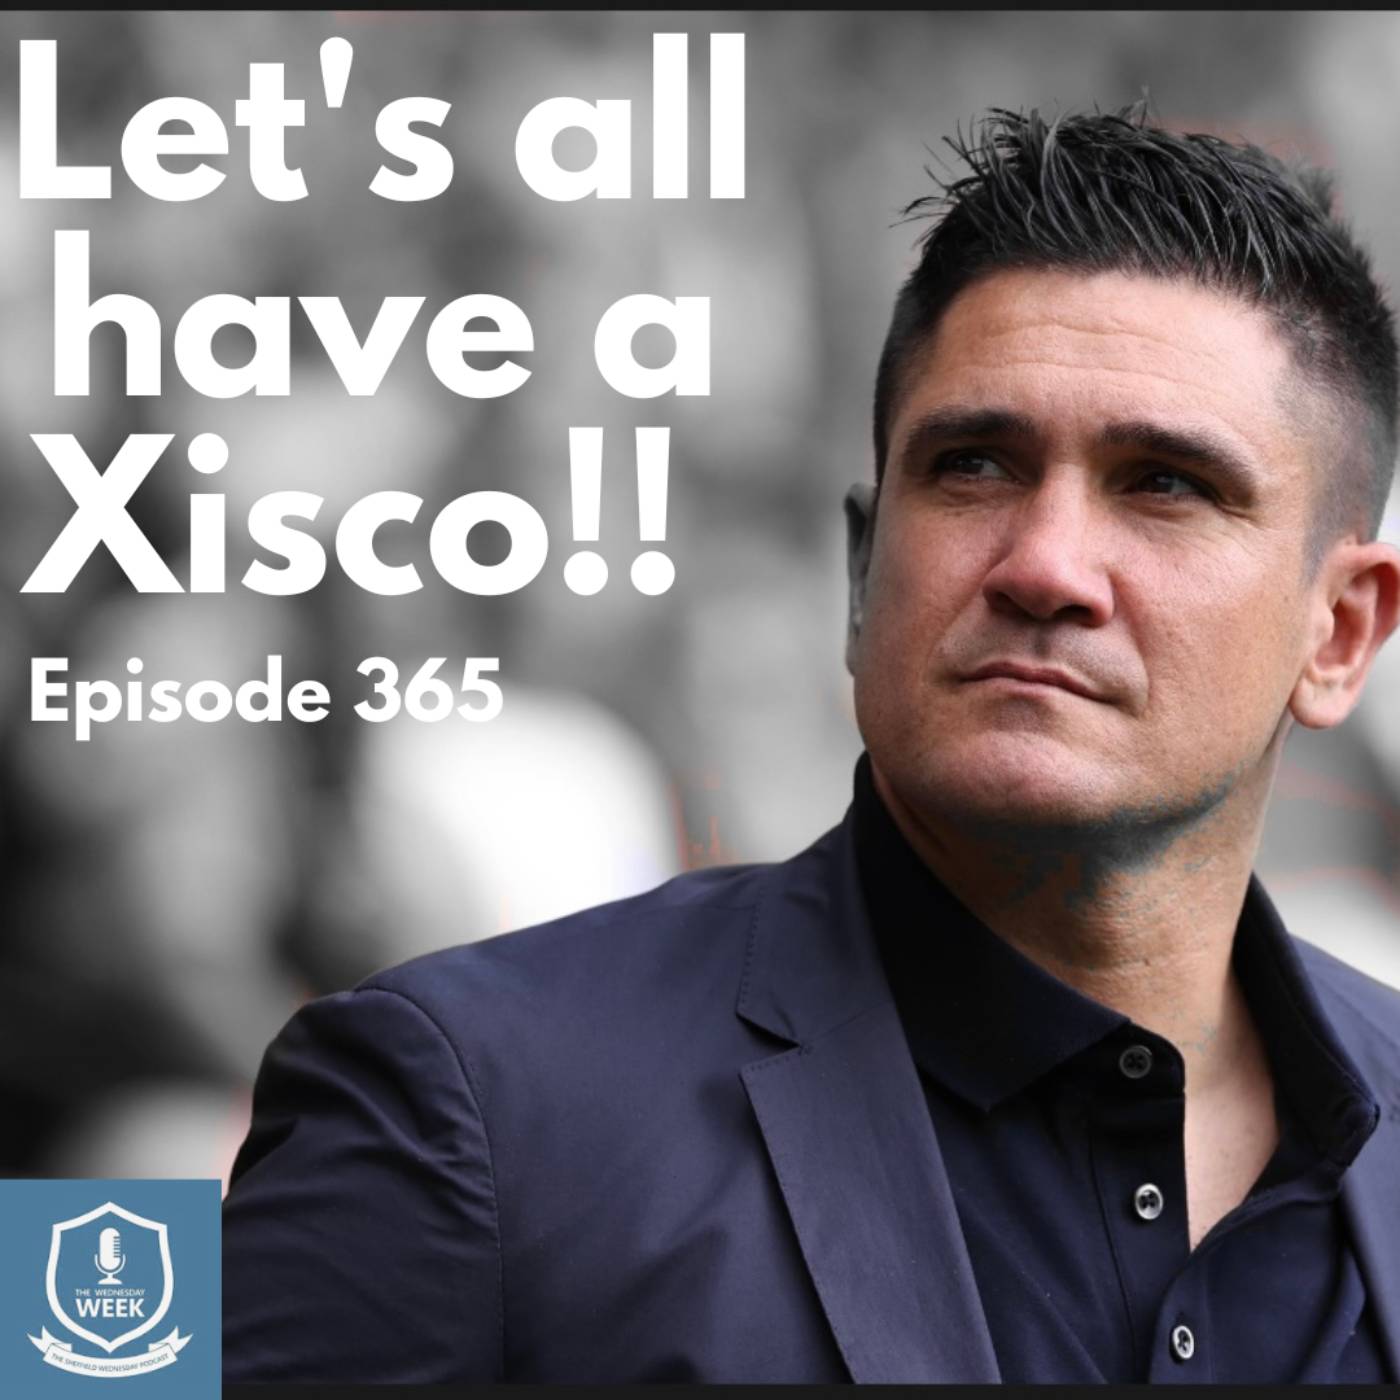 Let's all have a Xisco